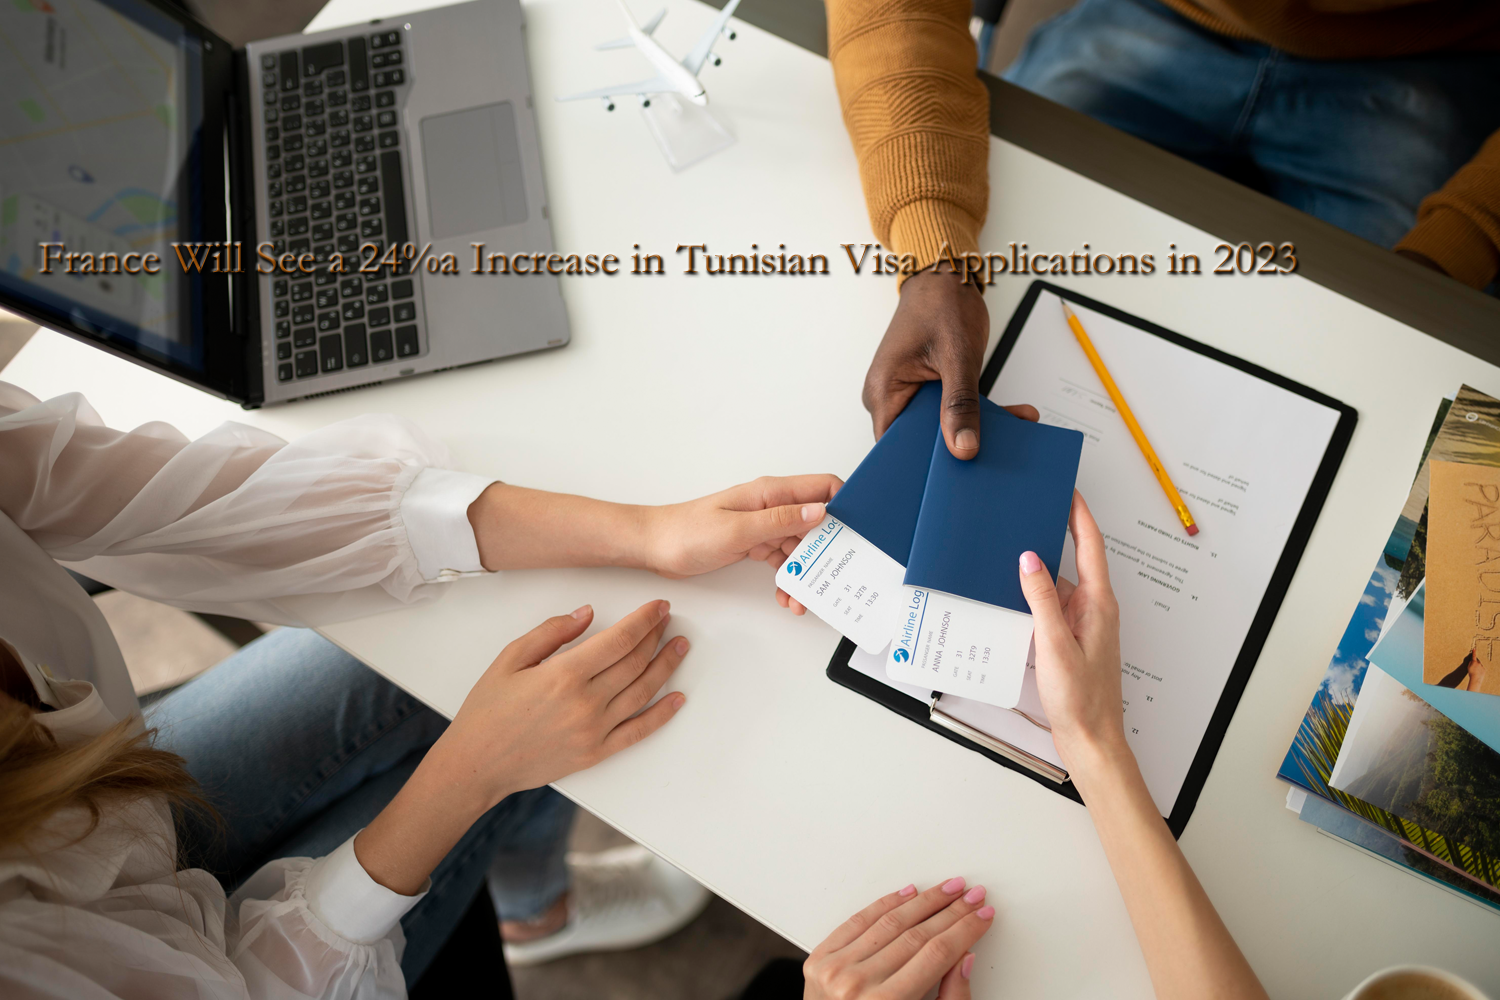 France Will See a 24% Increase in Tunisian Visa Applications in 2023.